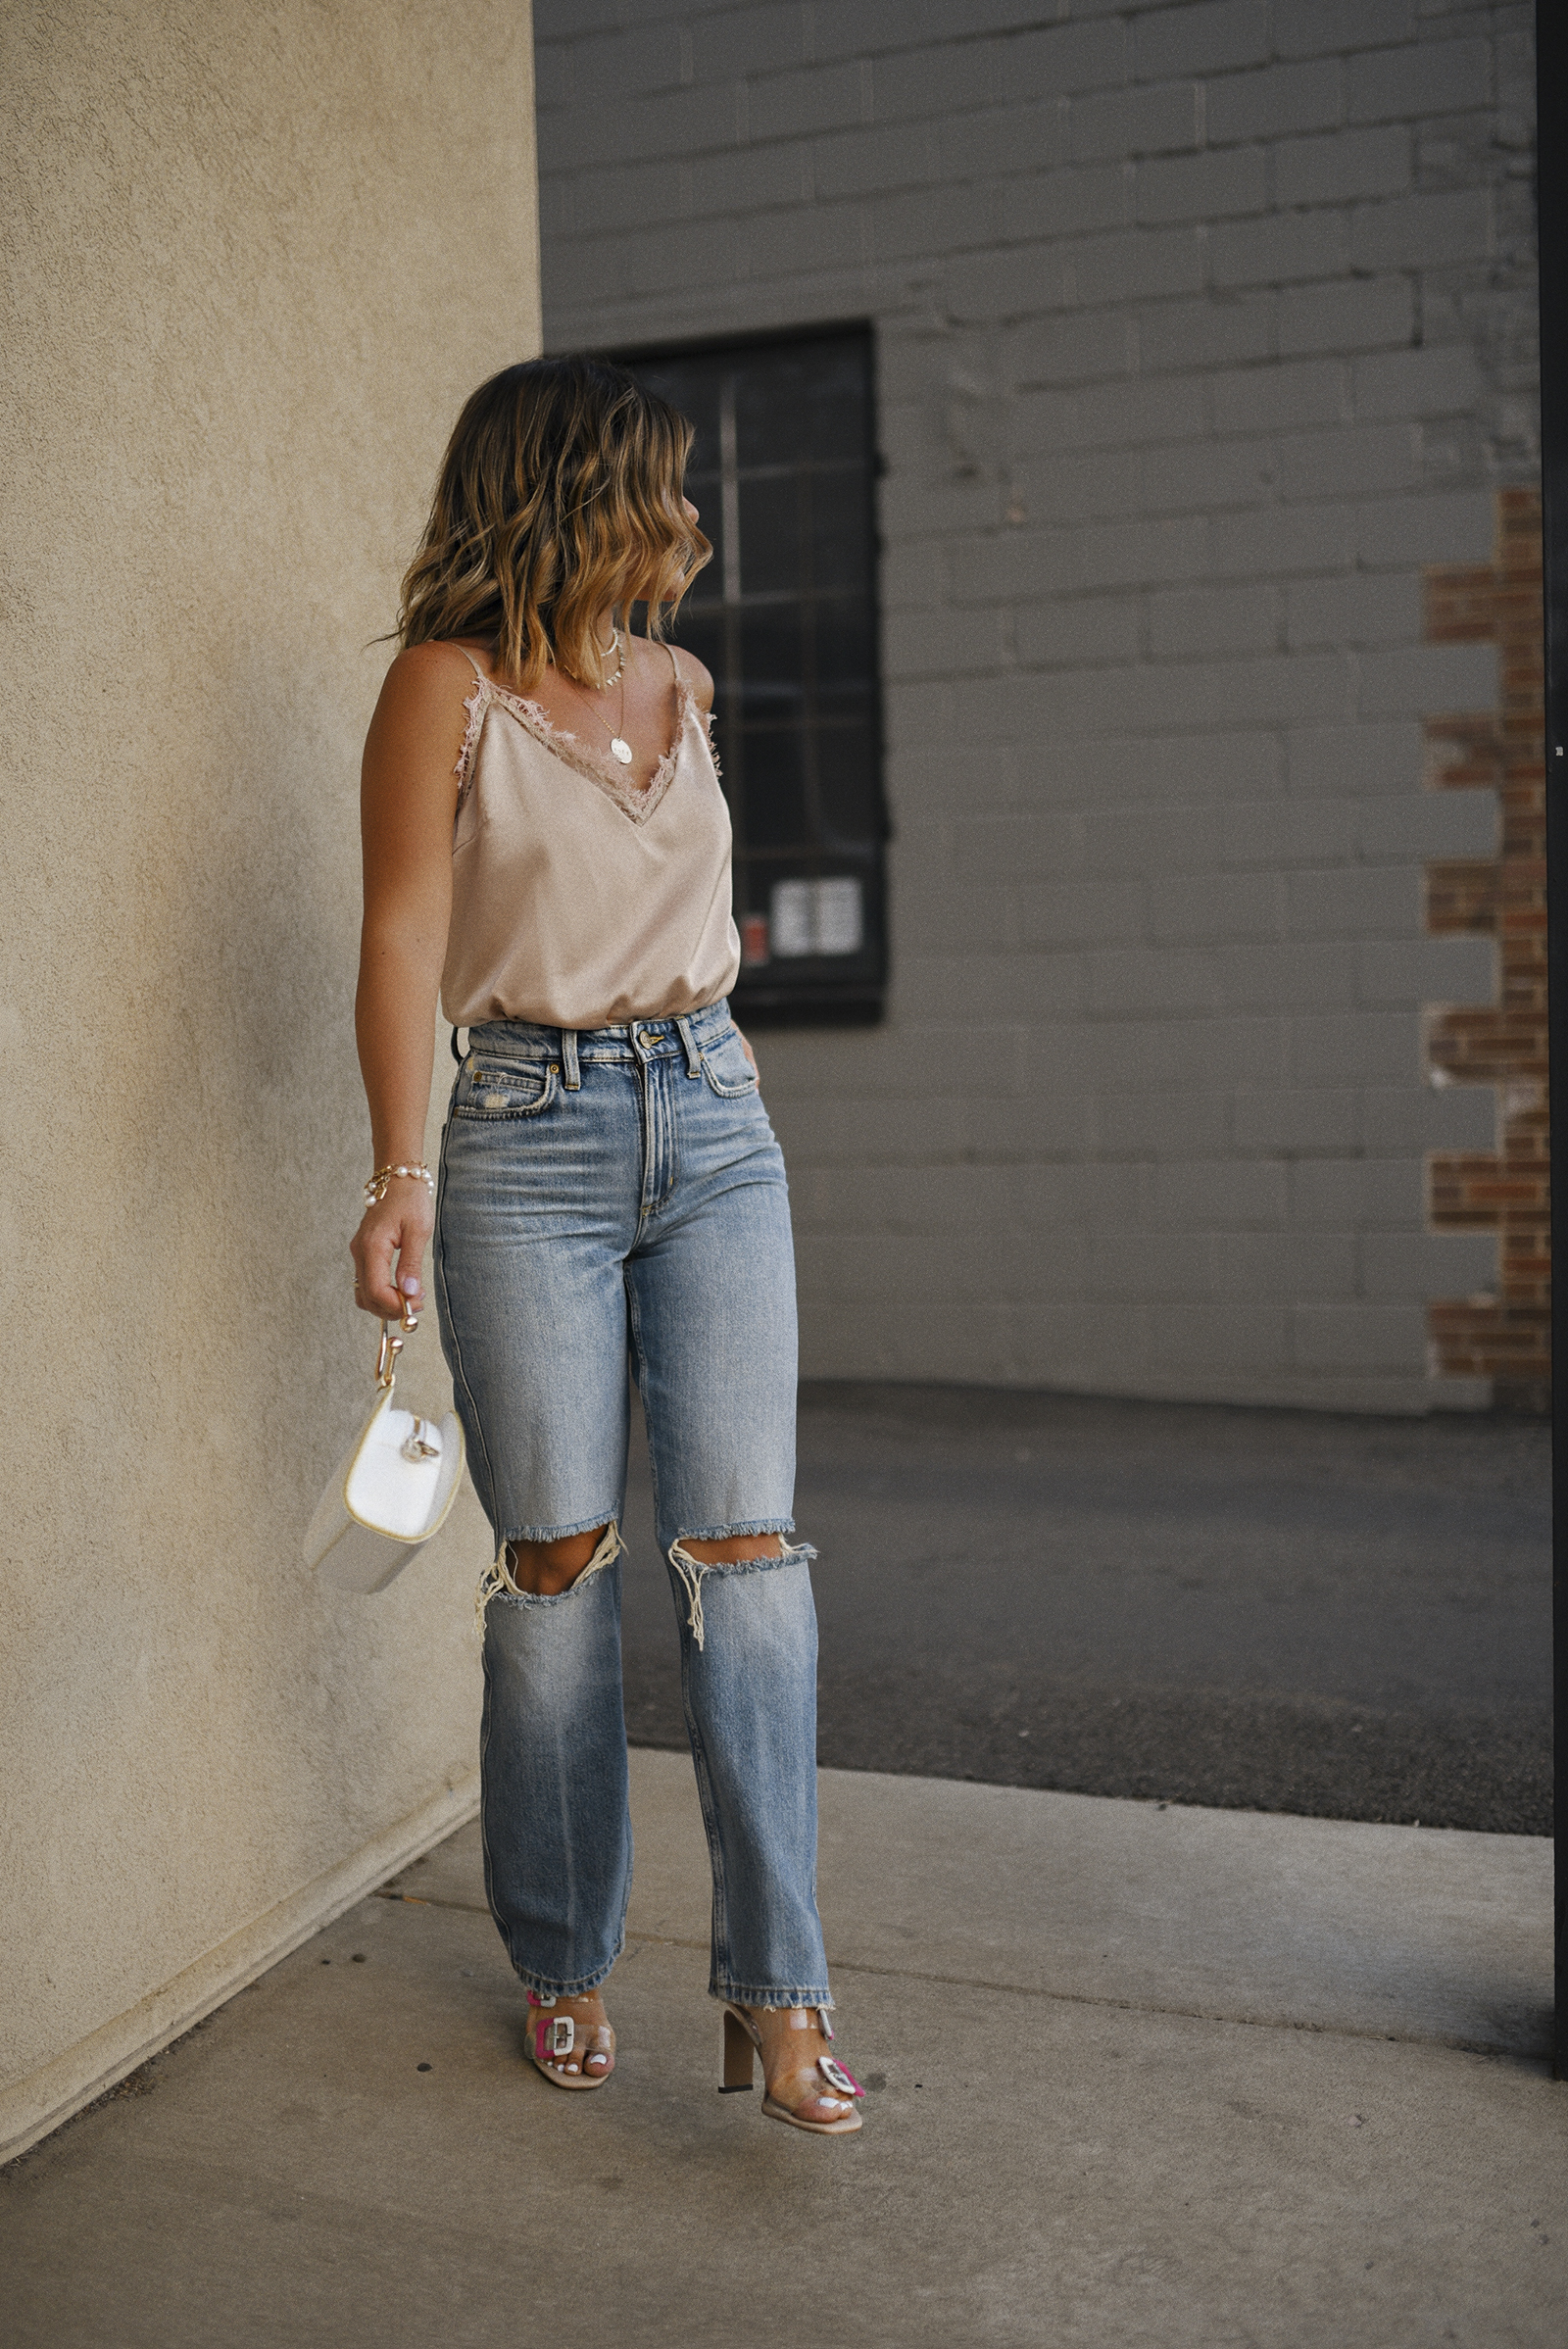 Heartloon lace trim top and Lee dad jeans